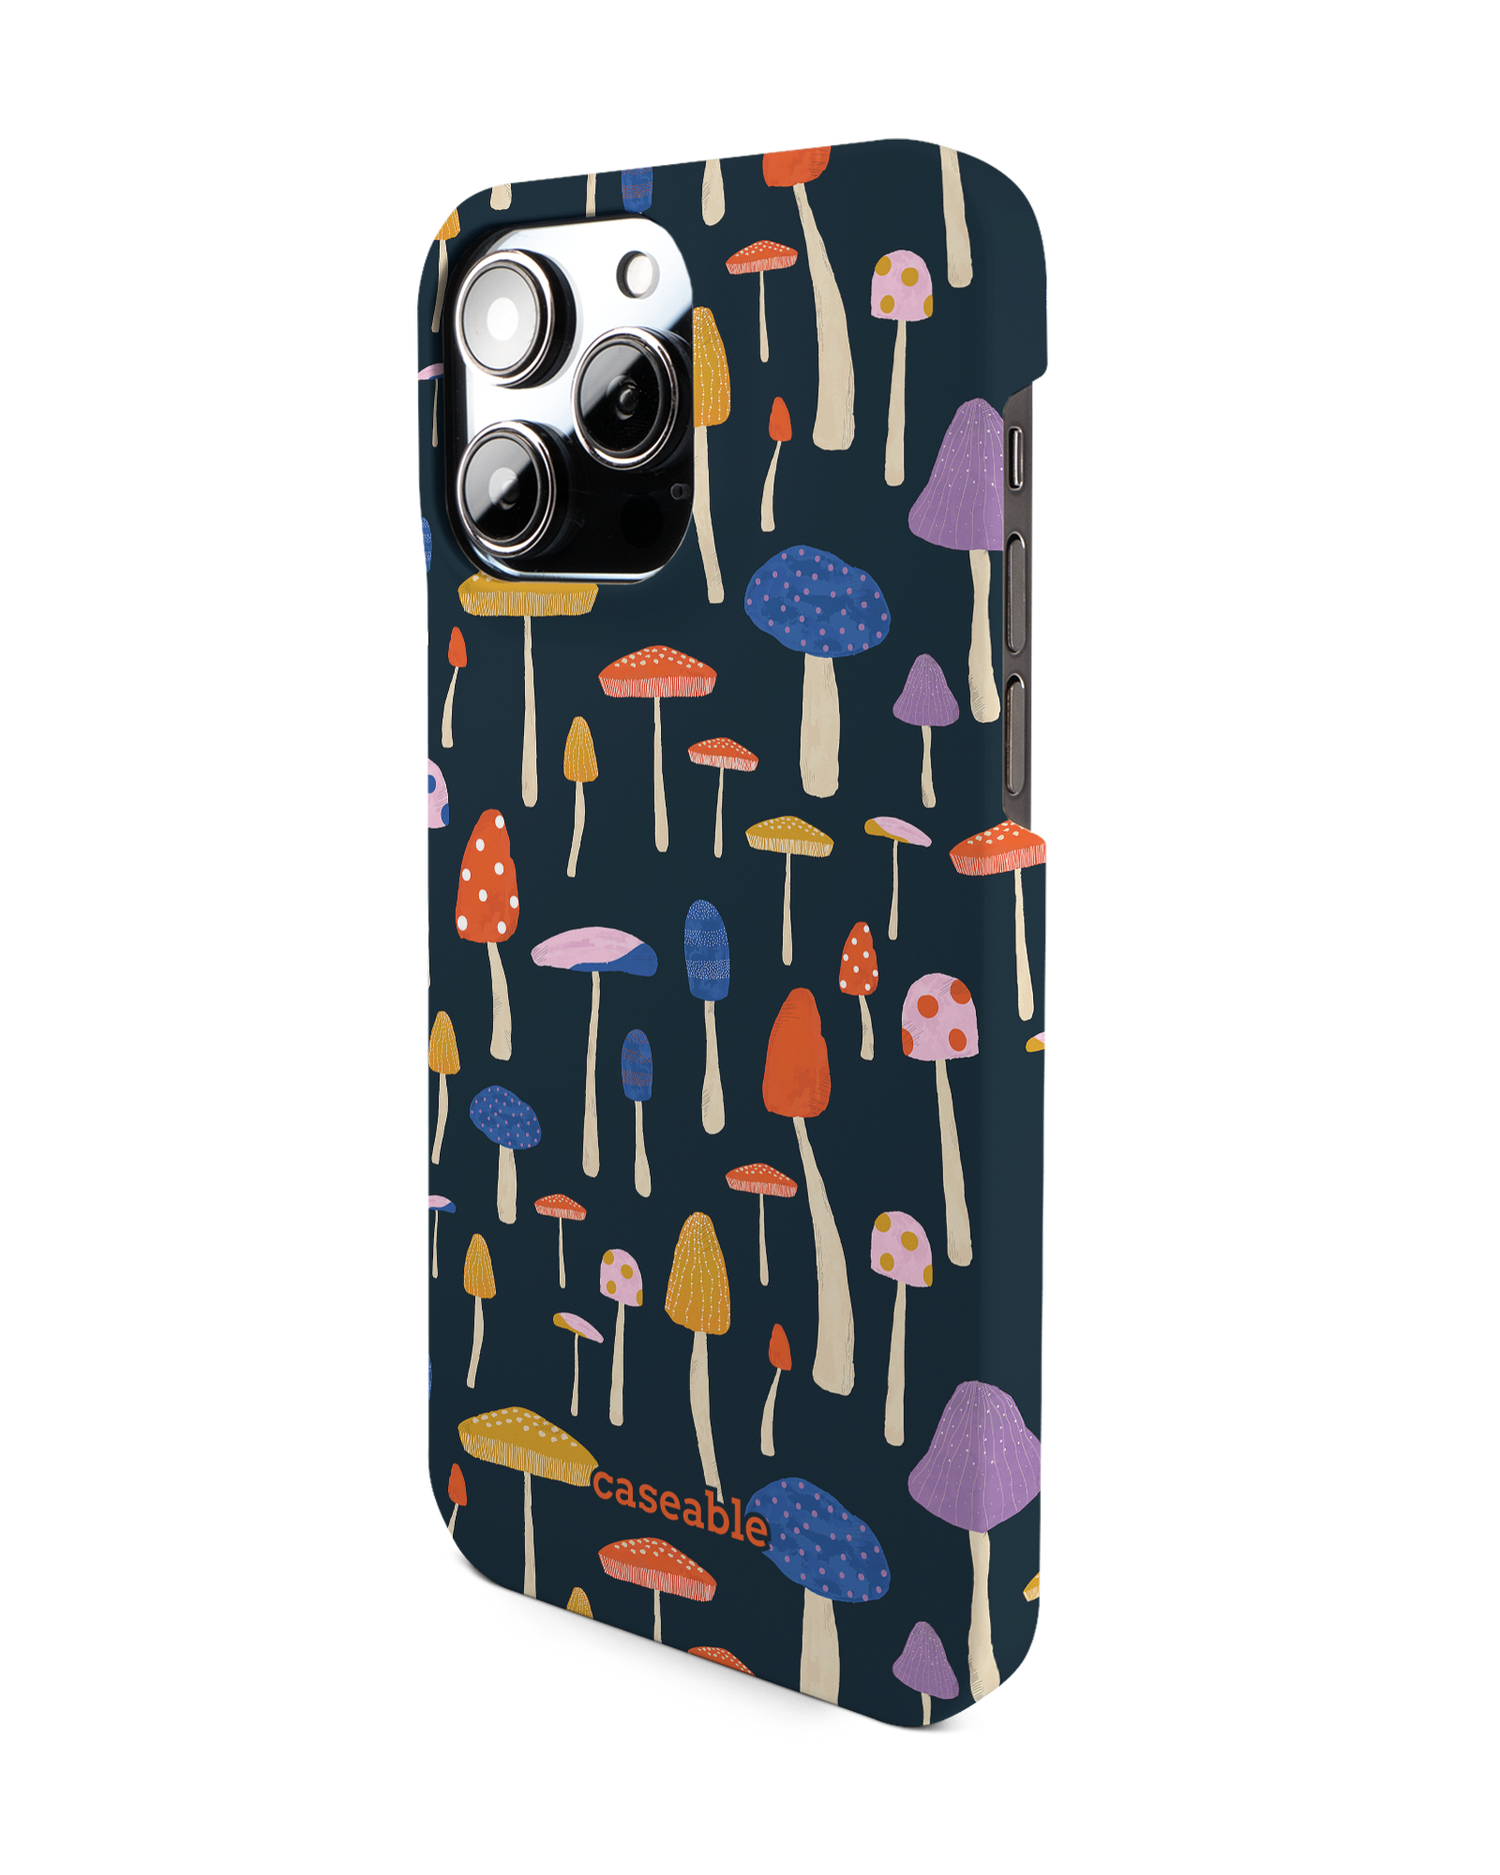 Mushroom Delights Hard Shell Phone Case for Apple iPhone 14 Pro Max: View from the right side